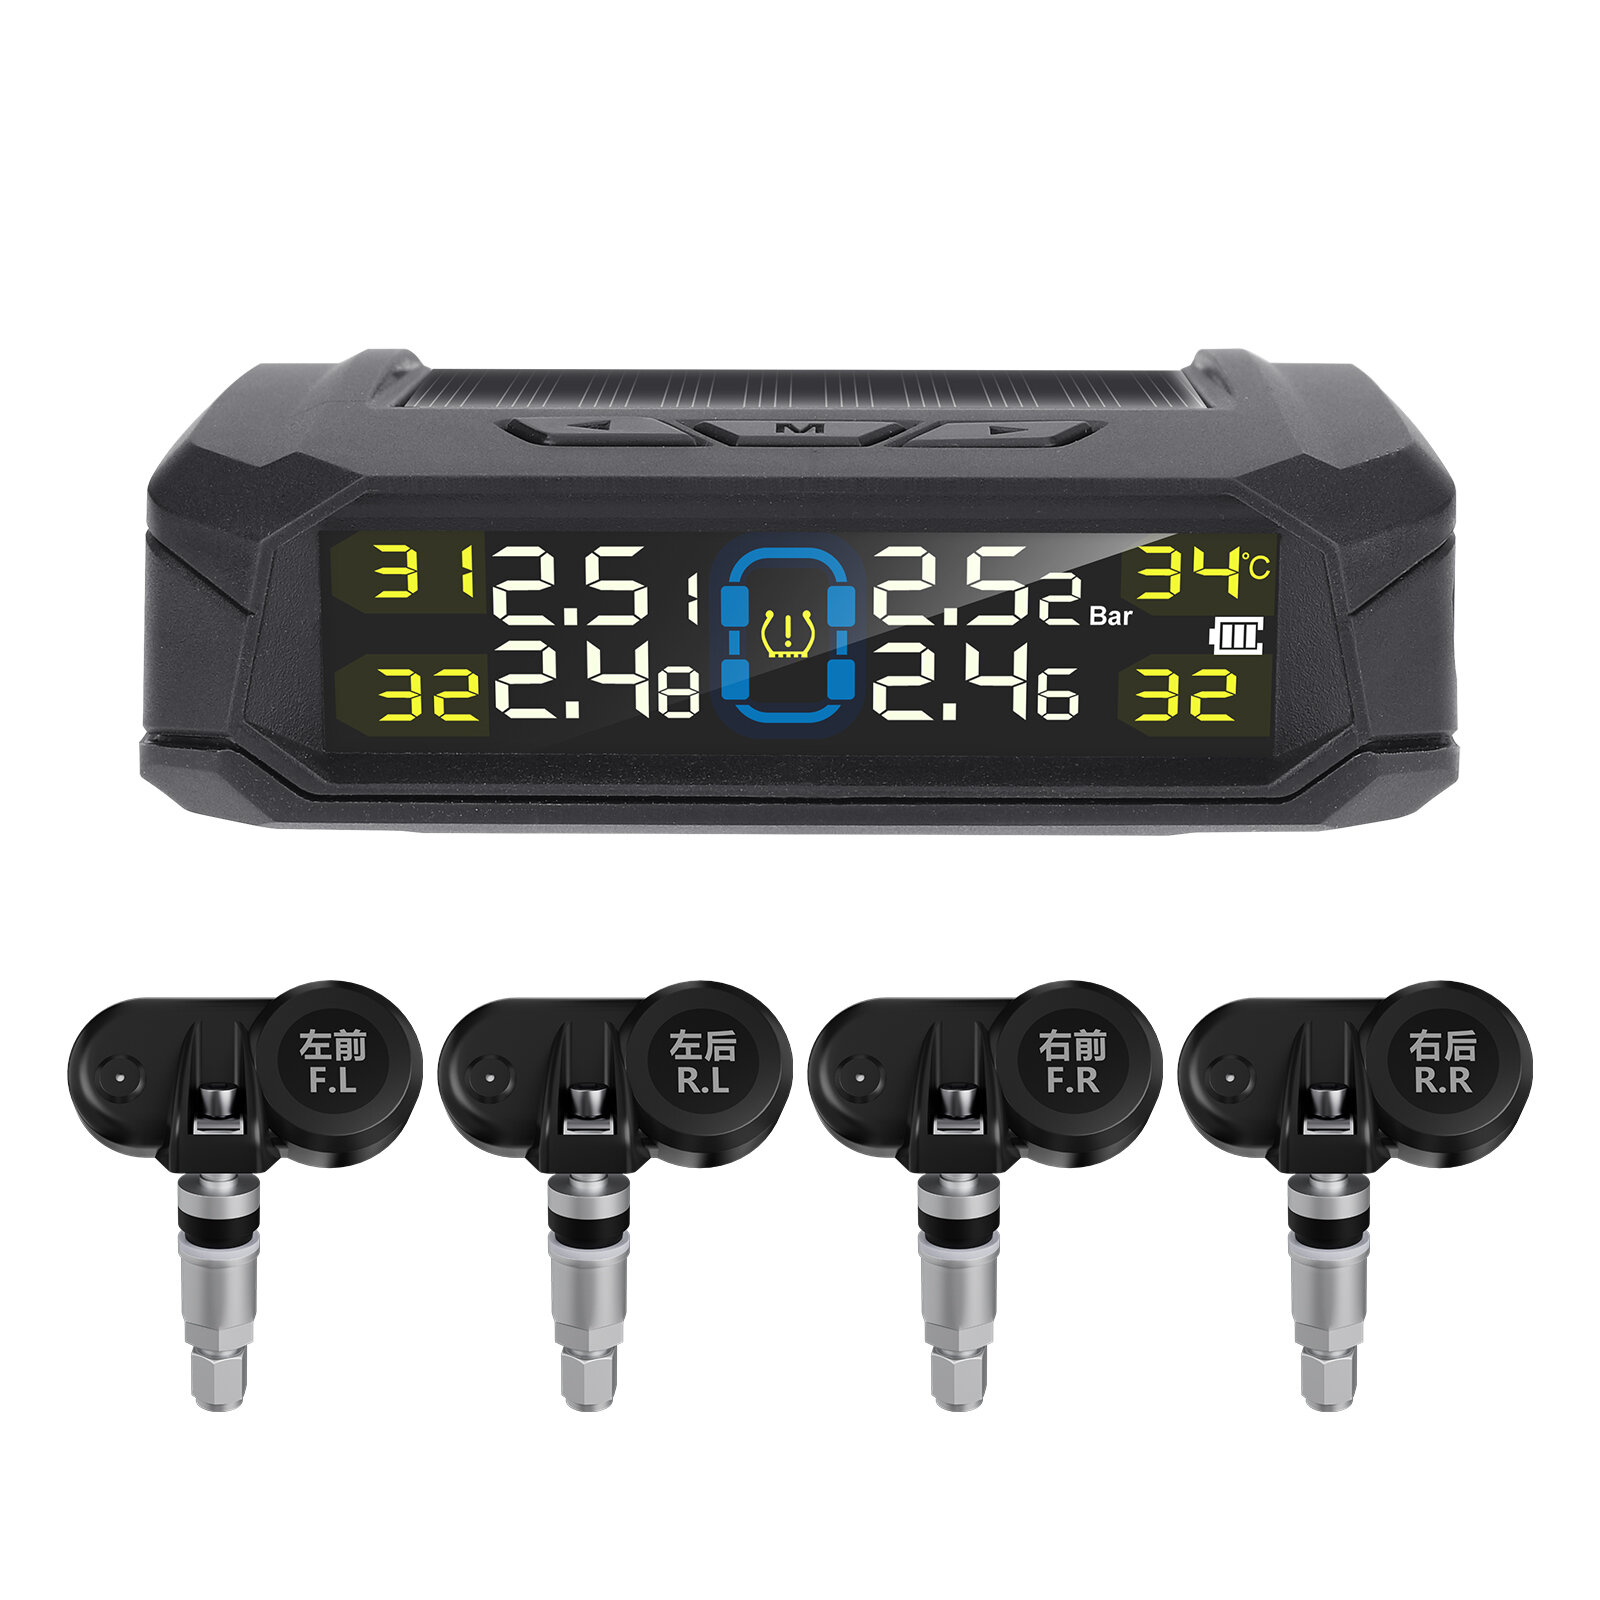 

Solar-Powered Wireless TPMS 433.92MHz LED Display Car Tire Pressure Monitoring System with 4 Sensors Real-time Monitorin